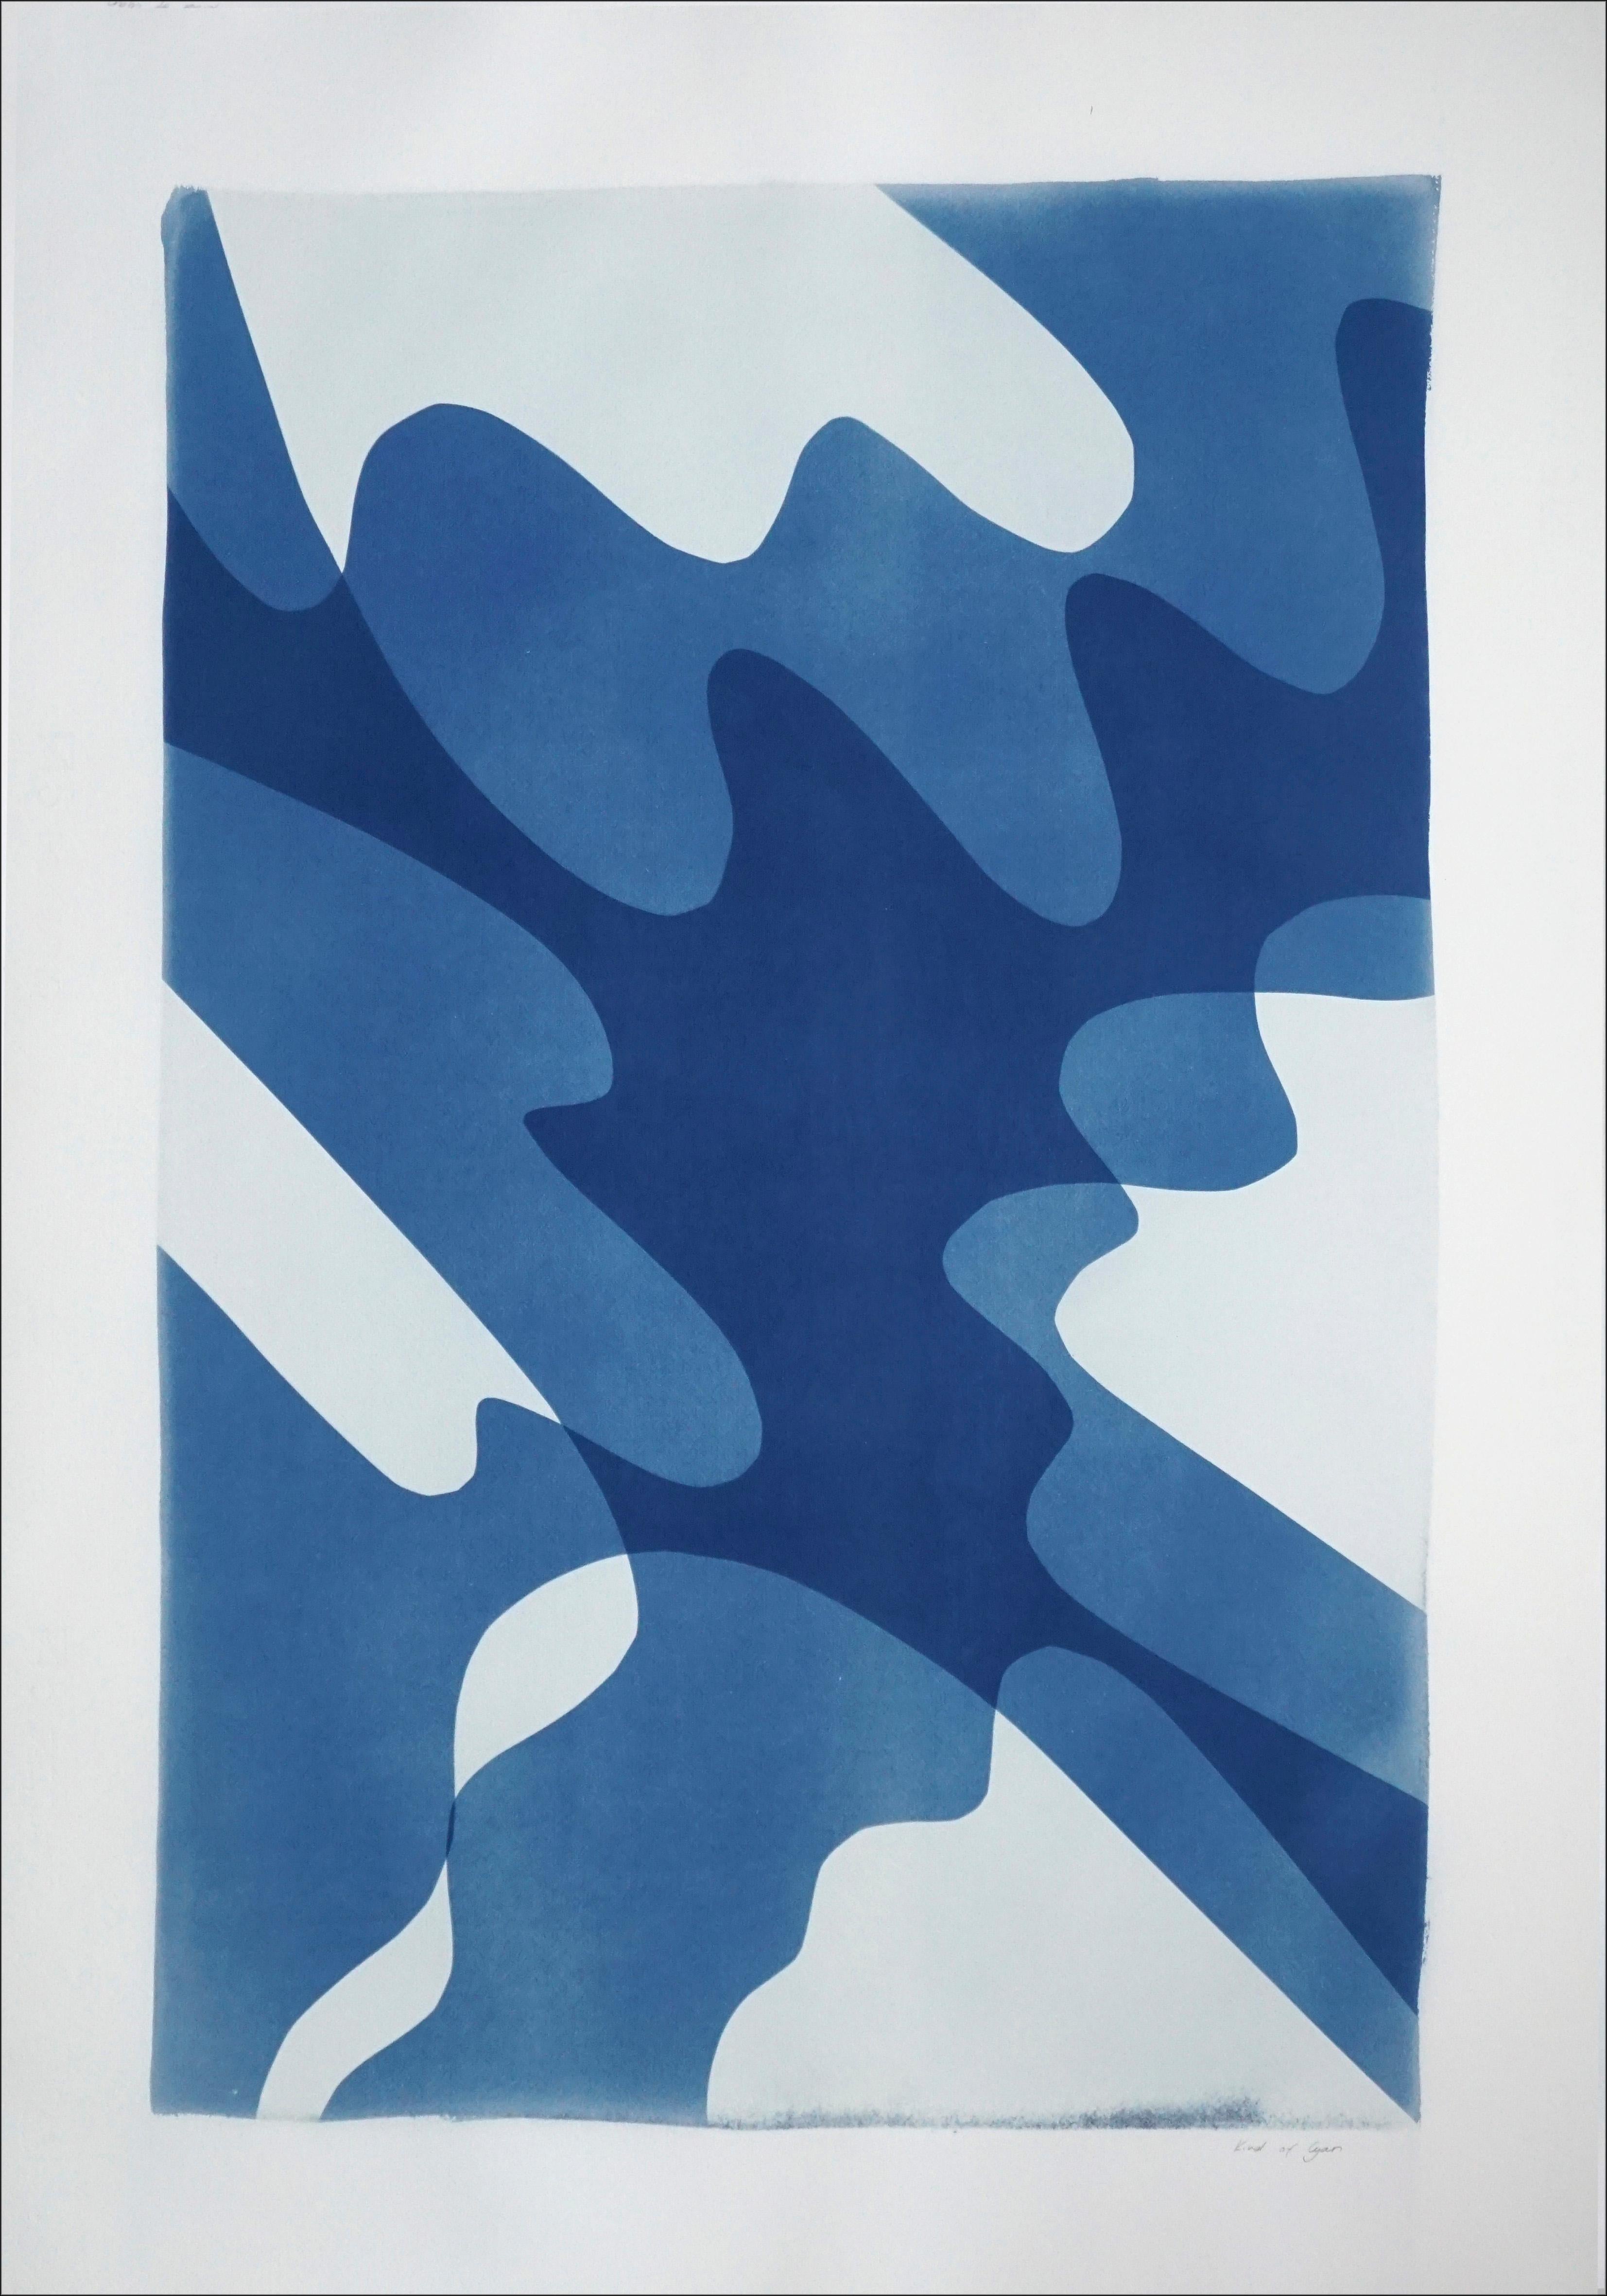 Kind of Cyan Abstract Print - Shaky Shadows, Handmade Monotype of Minimal Abstract Shapes and Layers in Blue